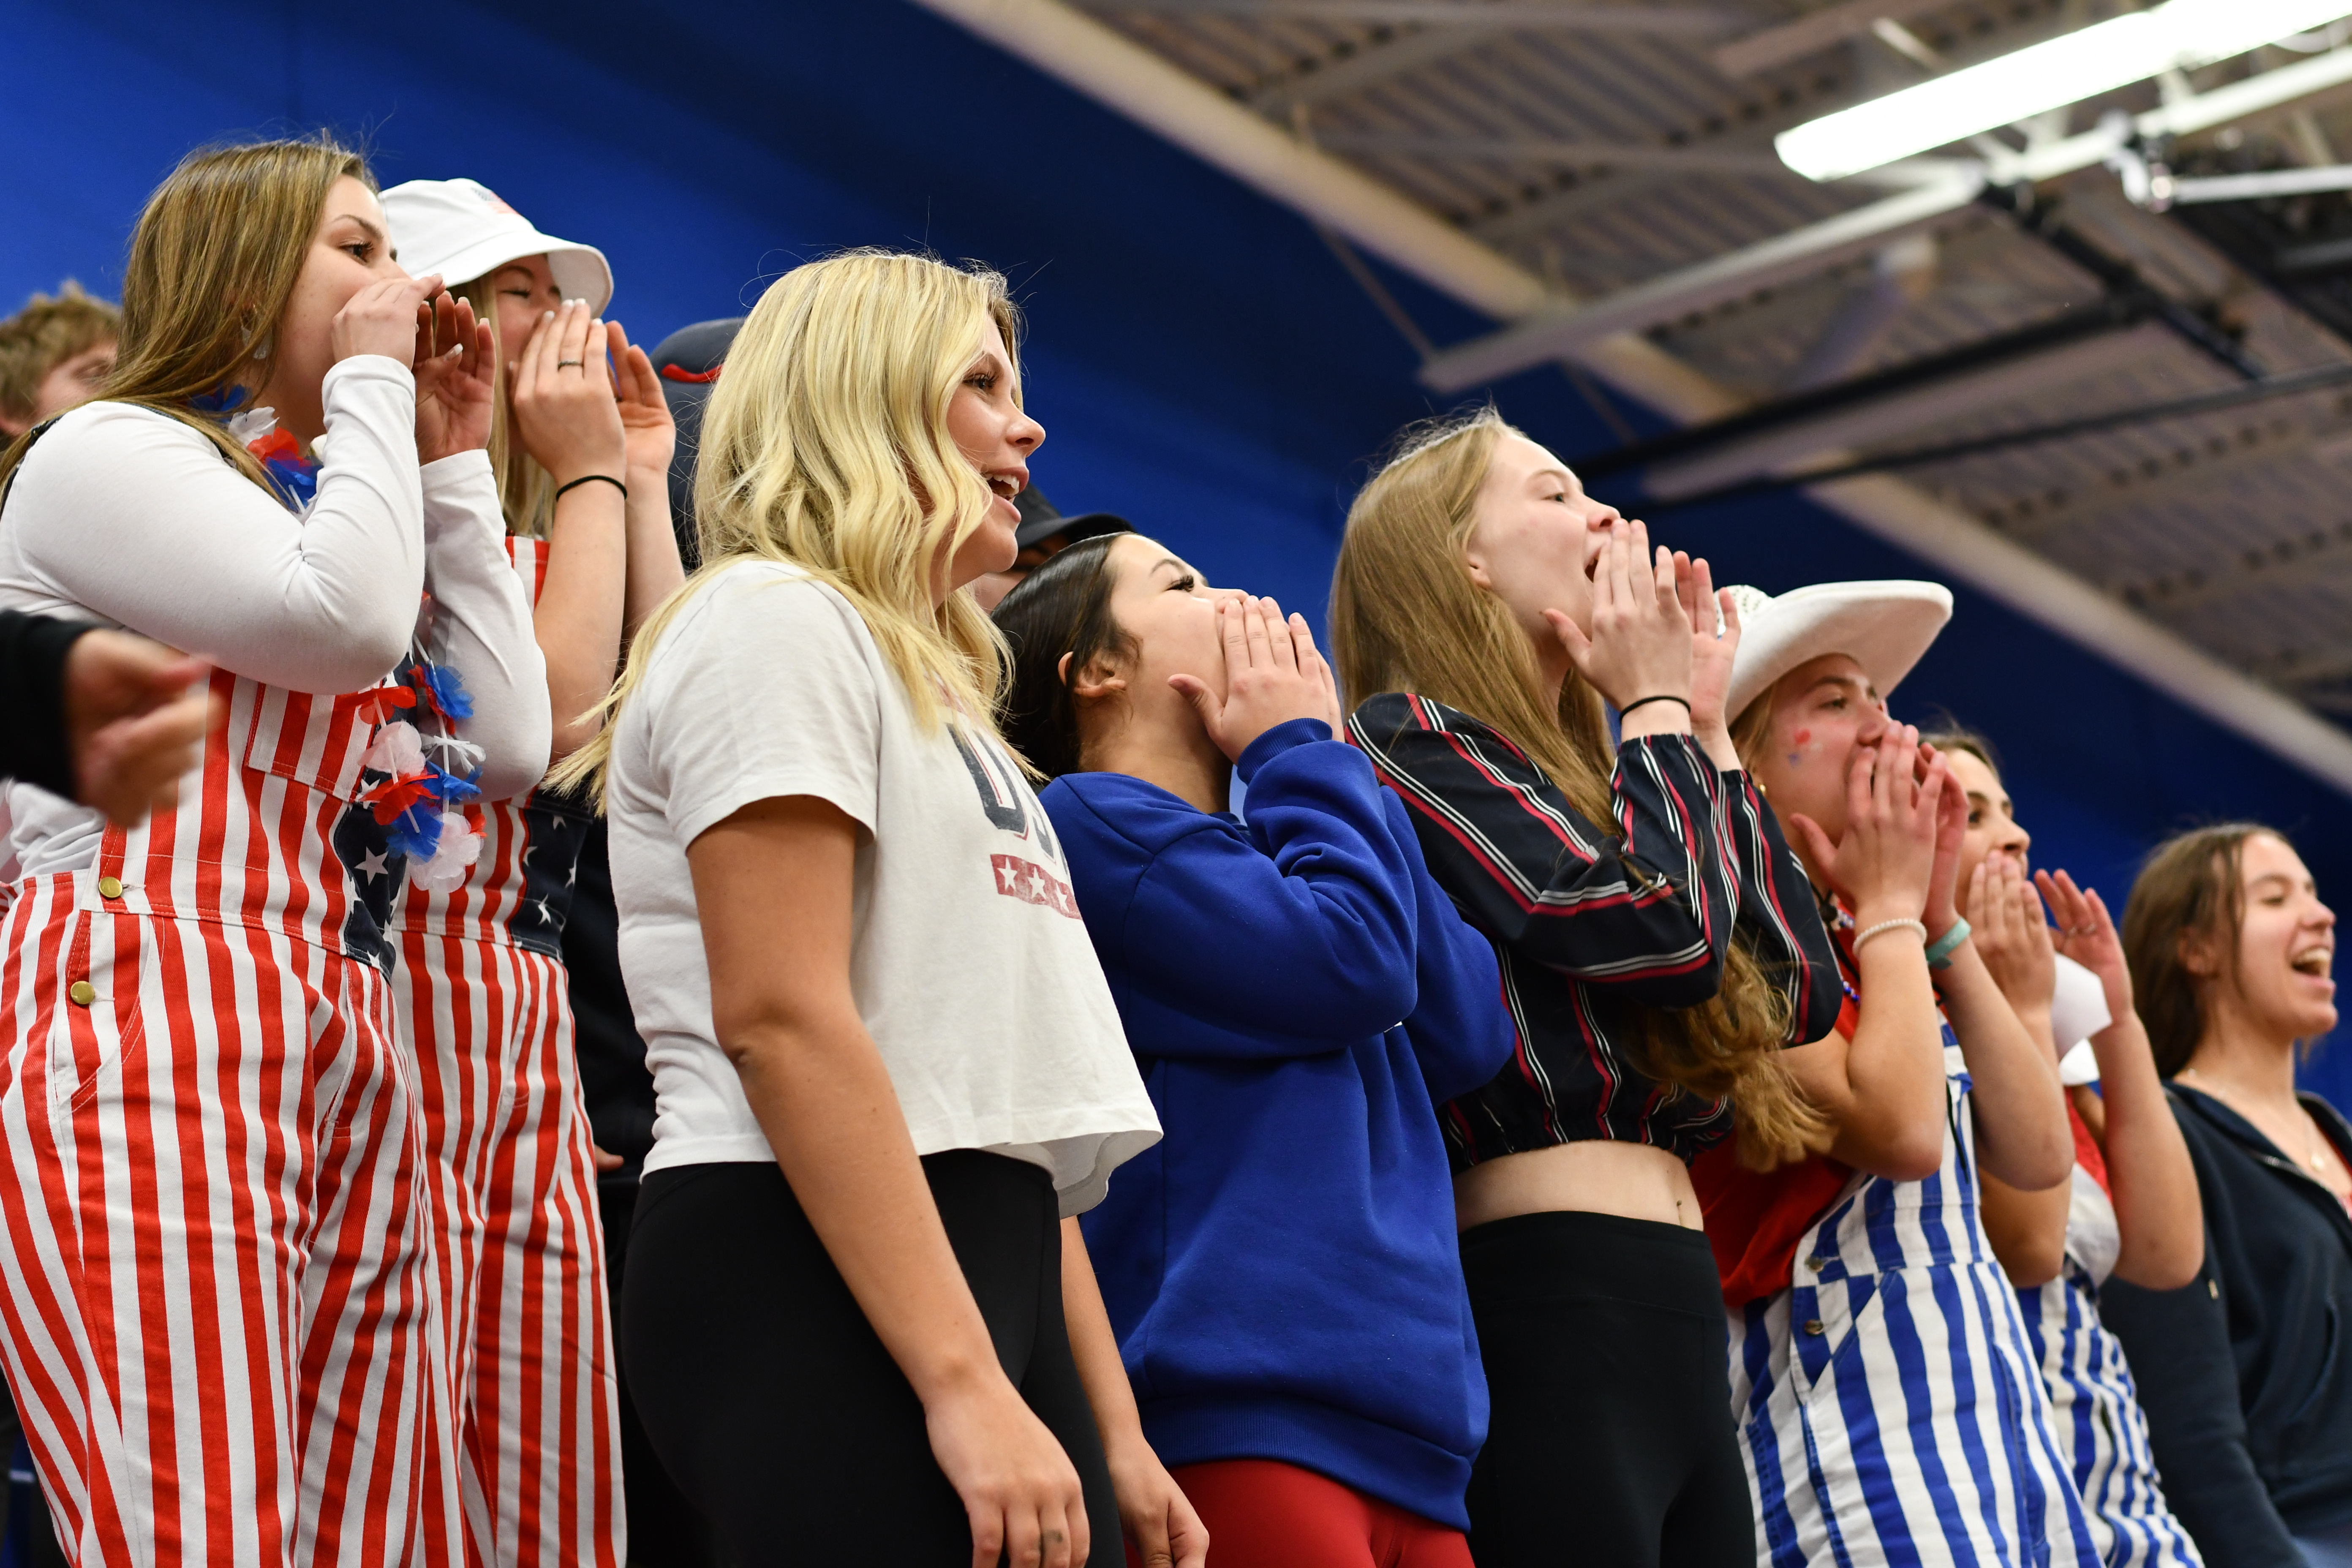 Red, White and Blue theme for the Volleyball game.  High School fans cheering. 